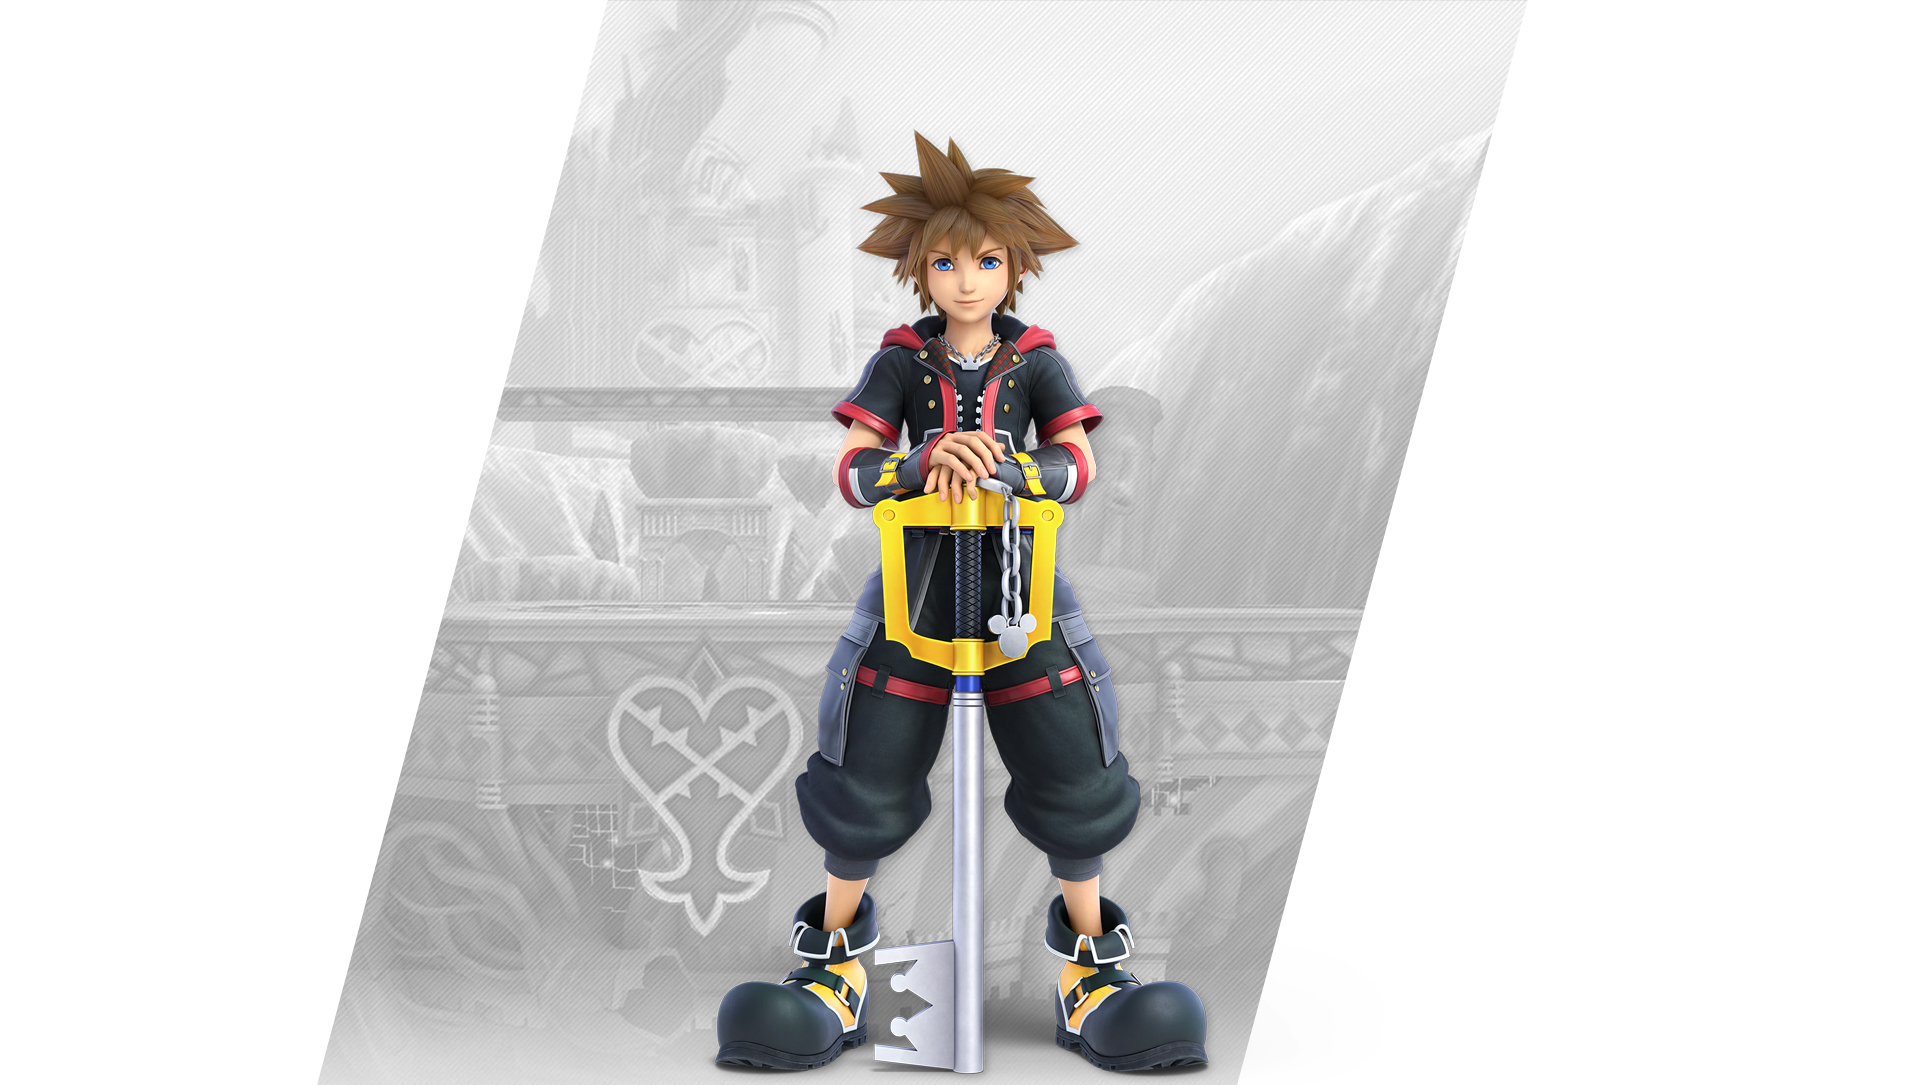 1929x1085 Super Smash Bros Ultimate Sora Costume 4 Wallpapers Cat with Monocle